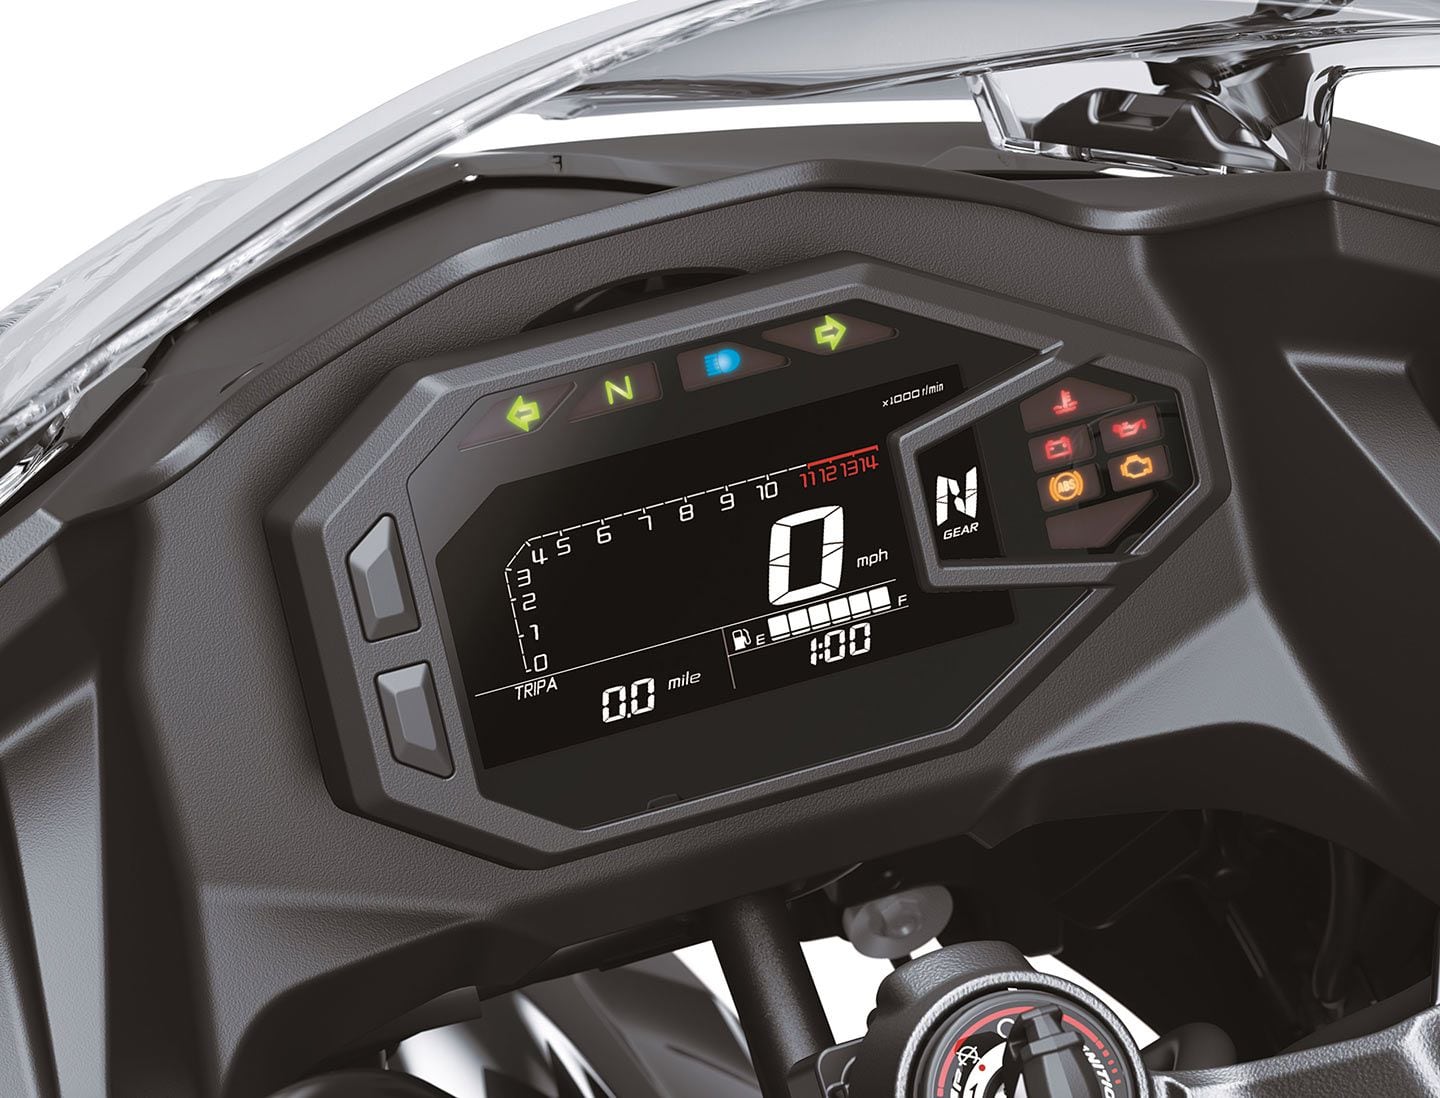 The new Ninja 500 gets an updated LCD dash and more comfortable seat.